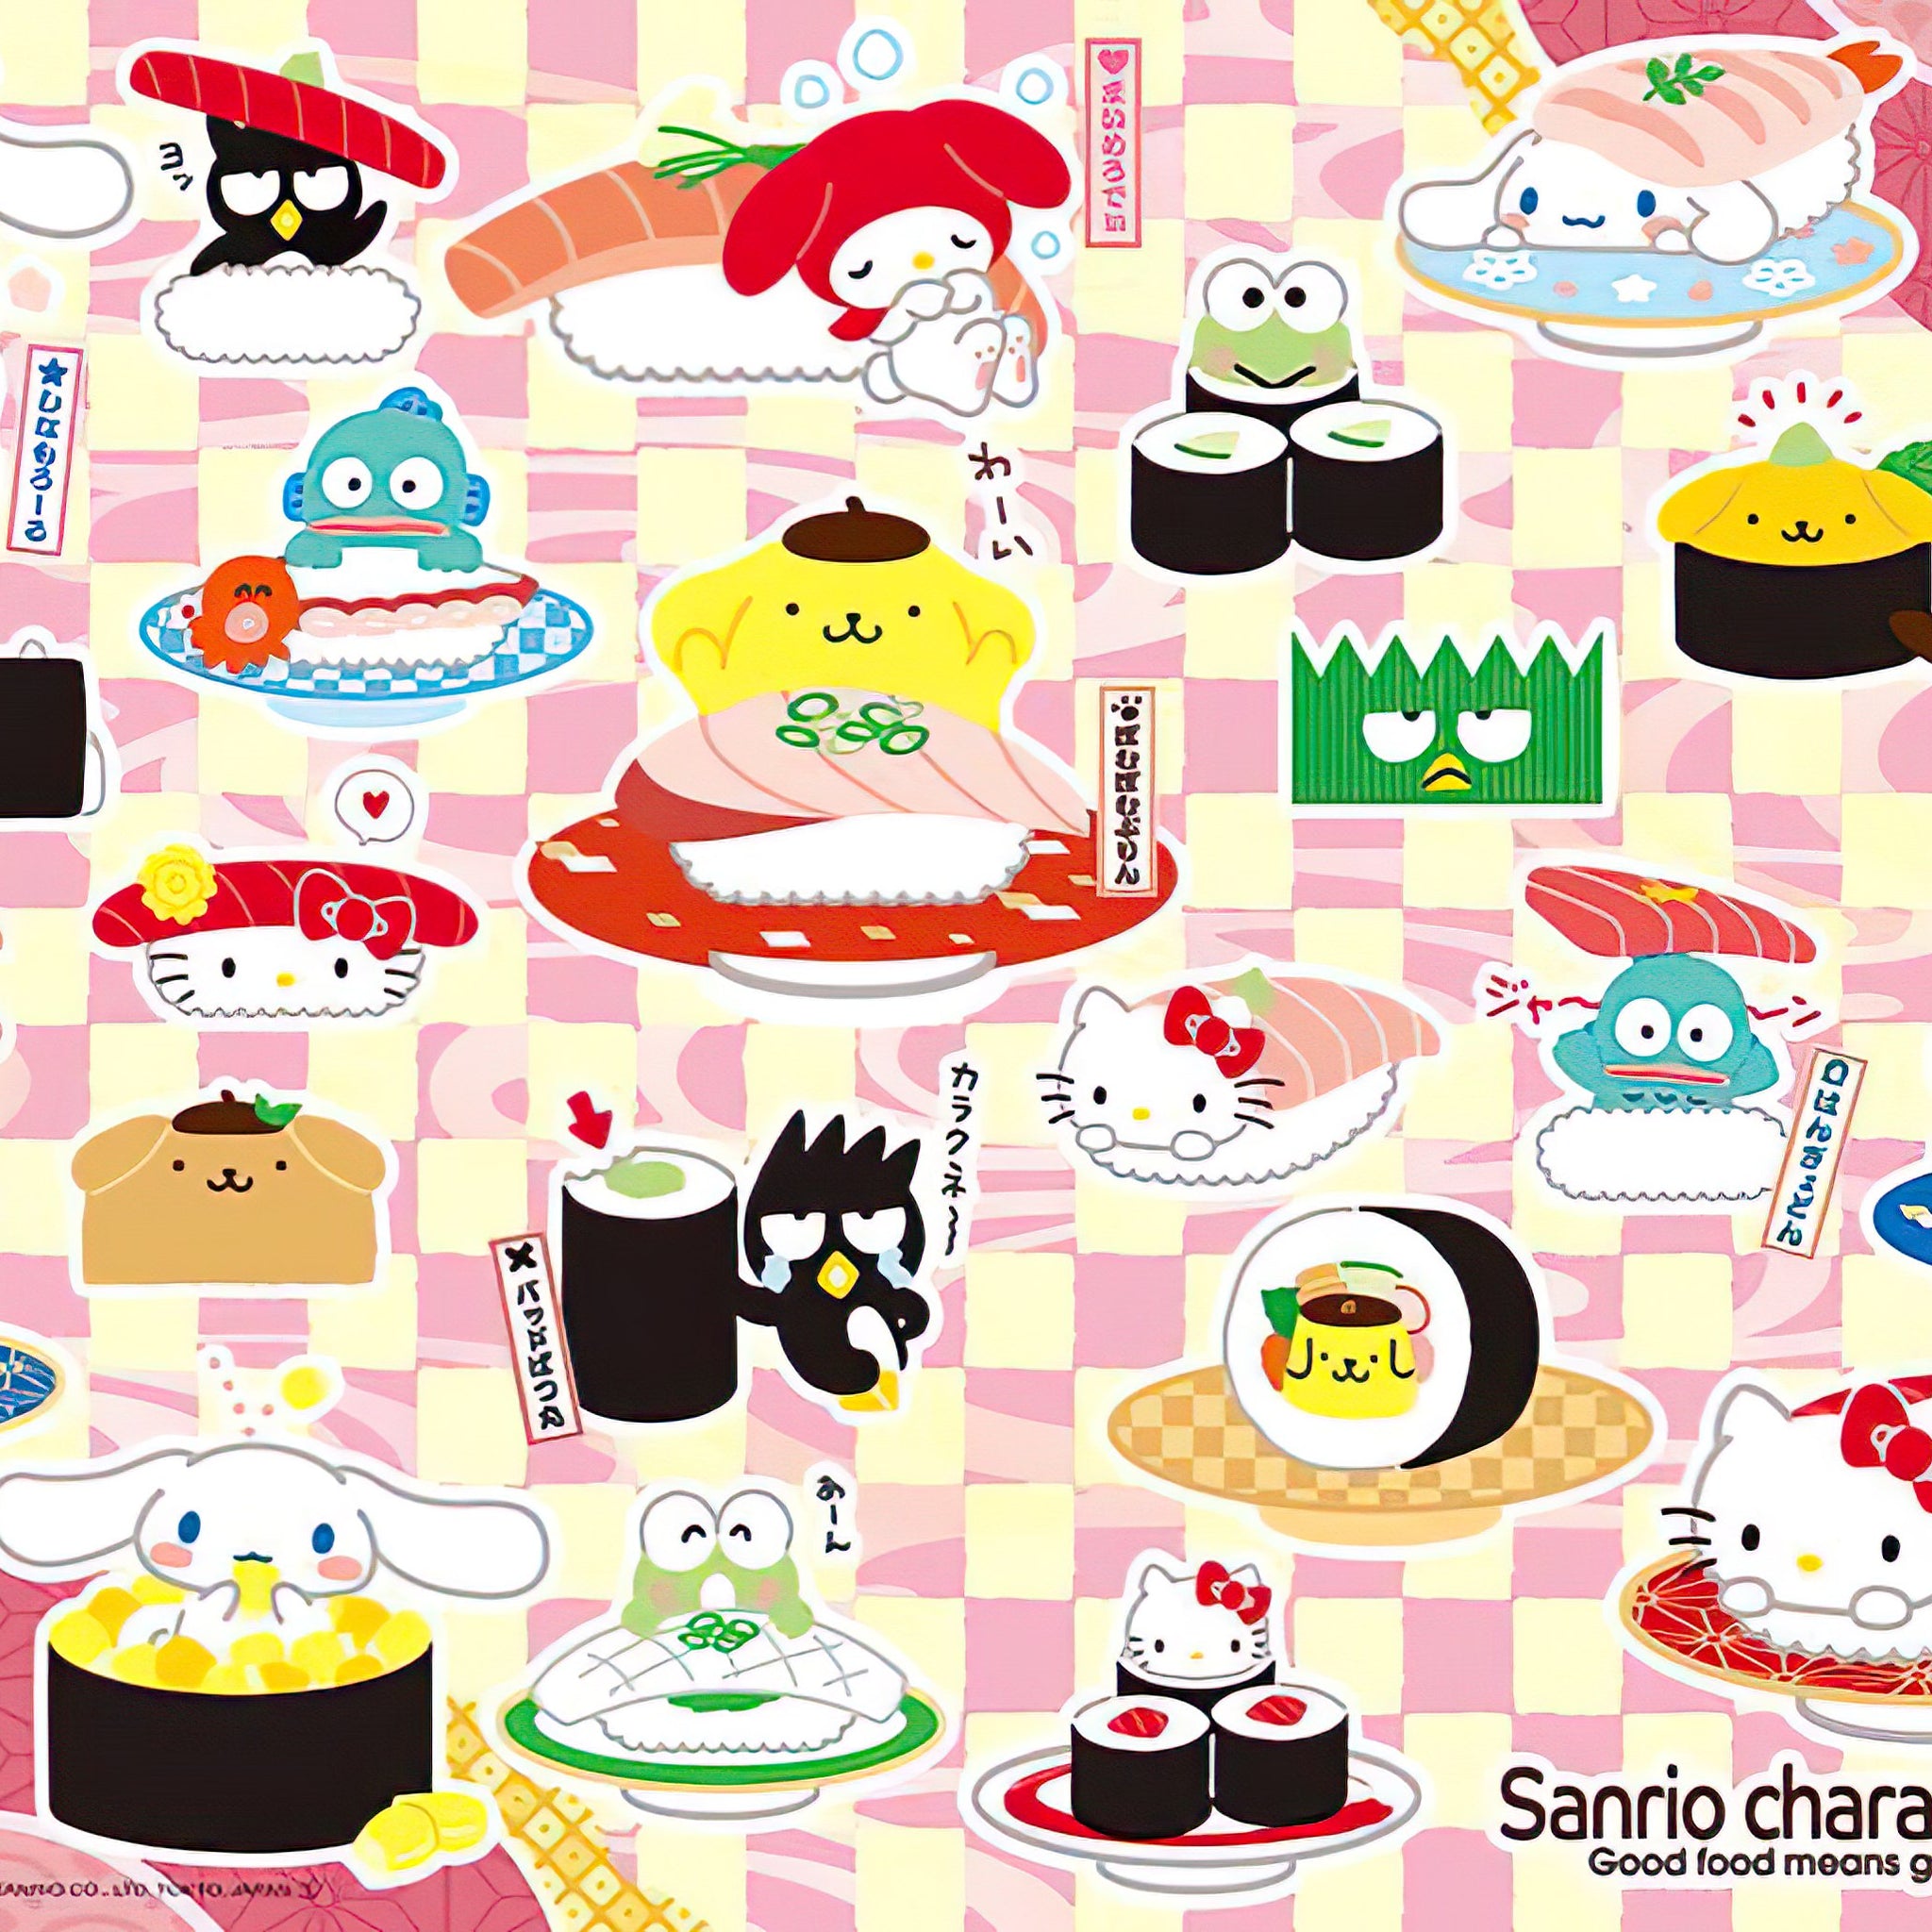 Beverly • Sanrio Characters Sushi Restaurant　300 PCS　Jigsaw Puzzle